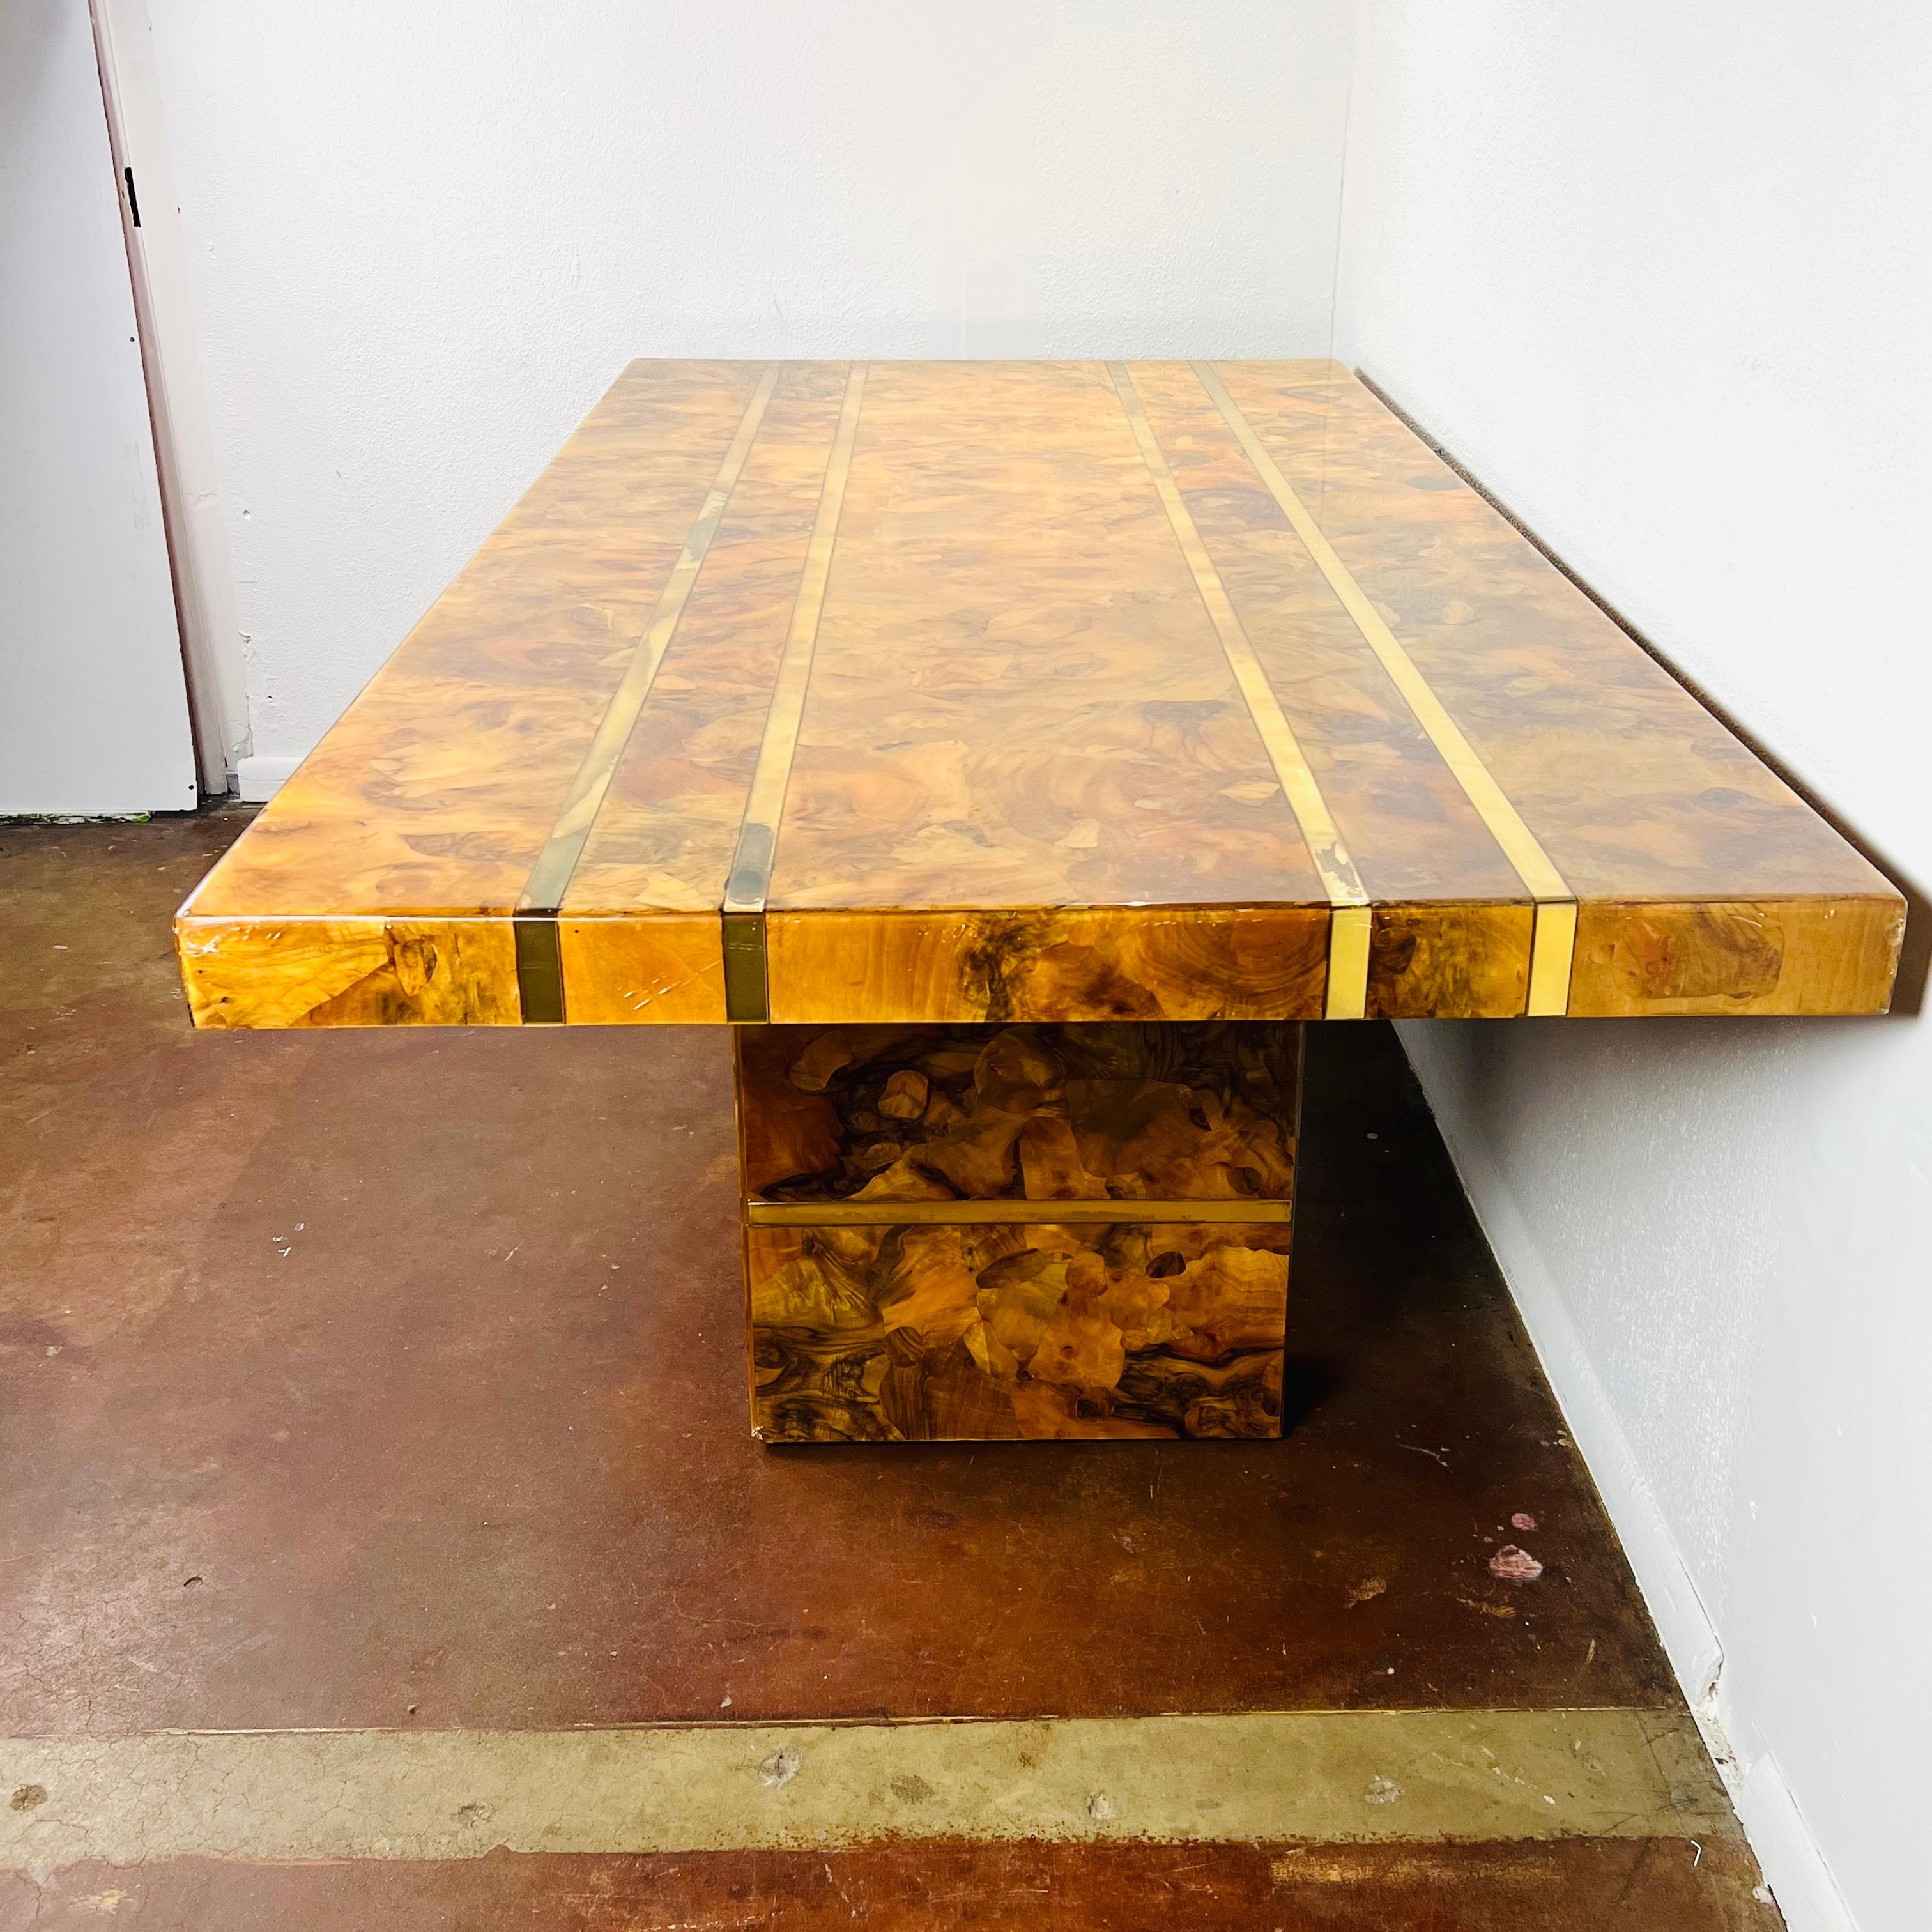 Extraordinary Mid-Century Modern burl wood dining table in the style of Milo Baughman. Features high gloss lacquer shine, brass accents, and double pedestal base. Custom made circa 1970. Some scratches, cracks, and chipping to lacquer coat at table